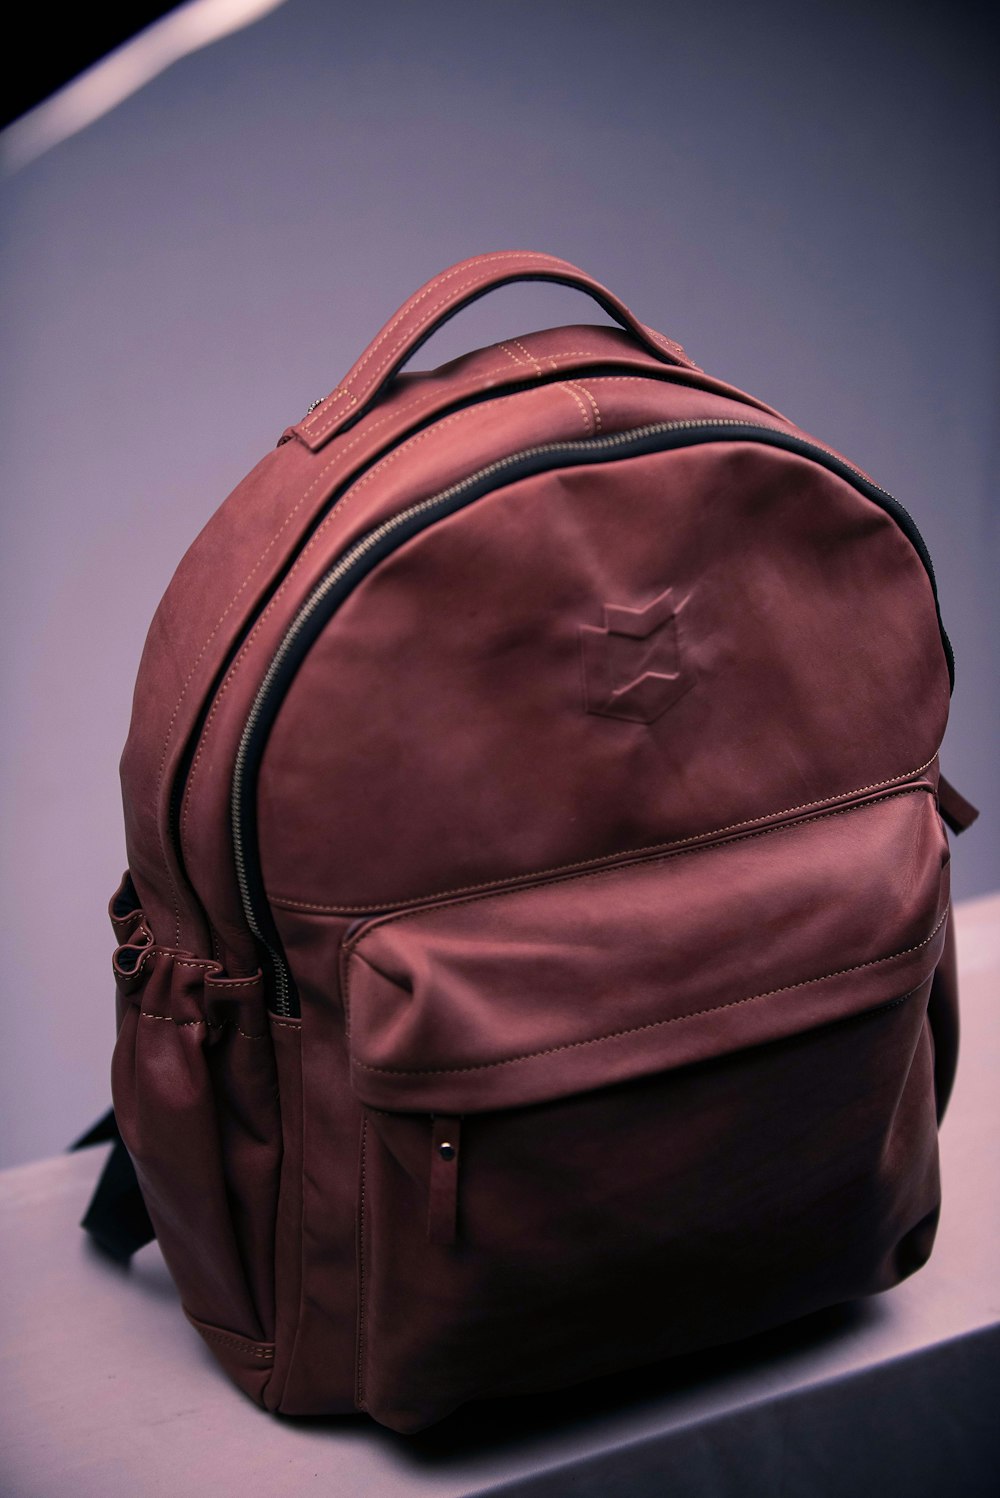 brown backpack on white textile